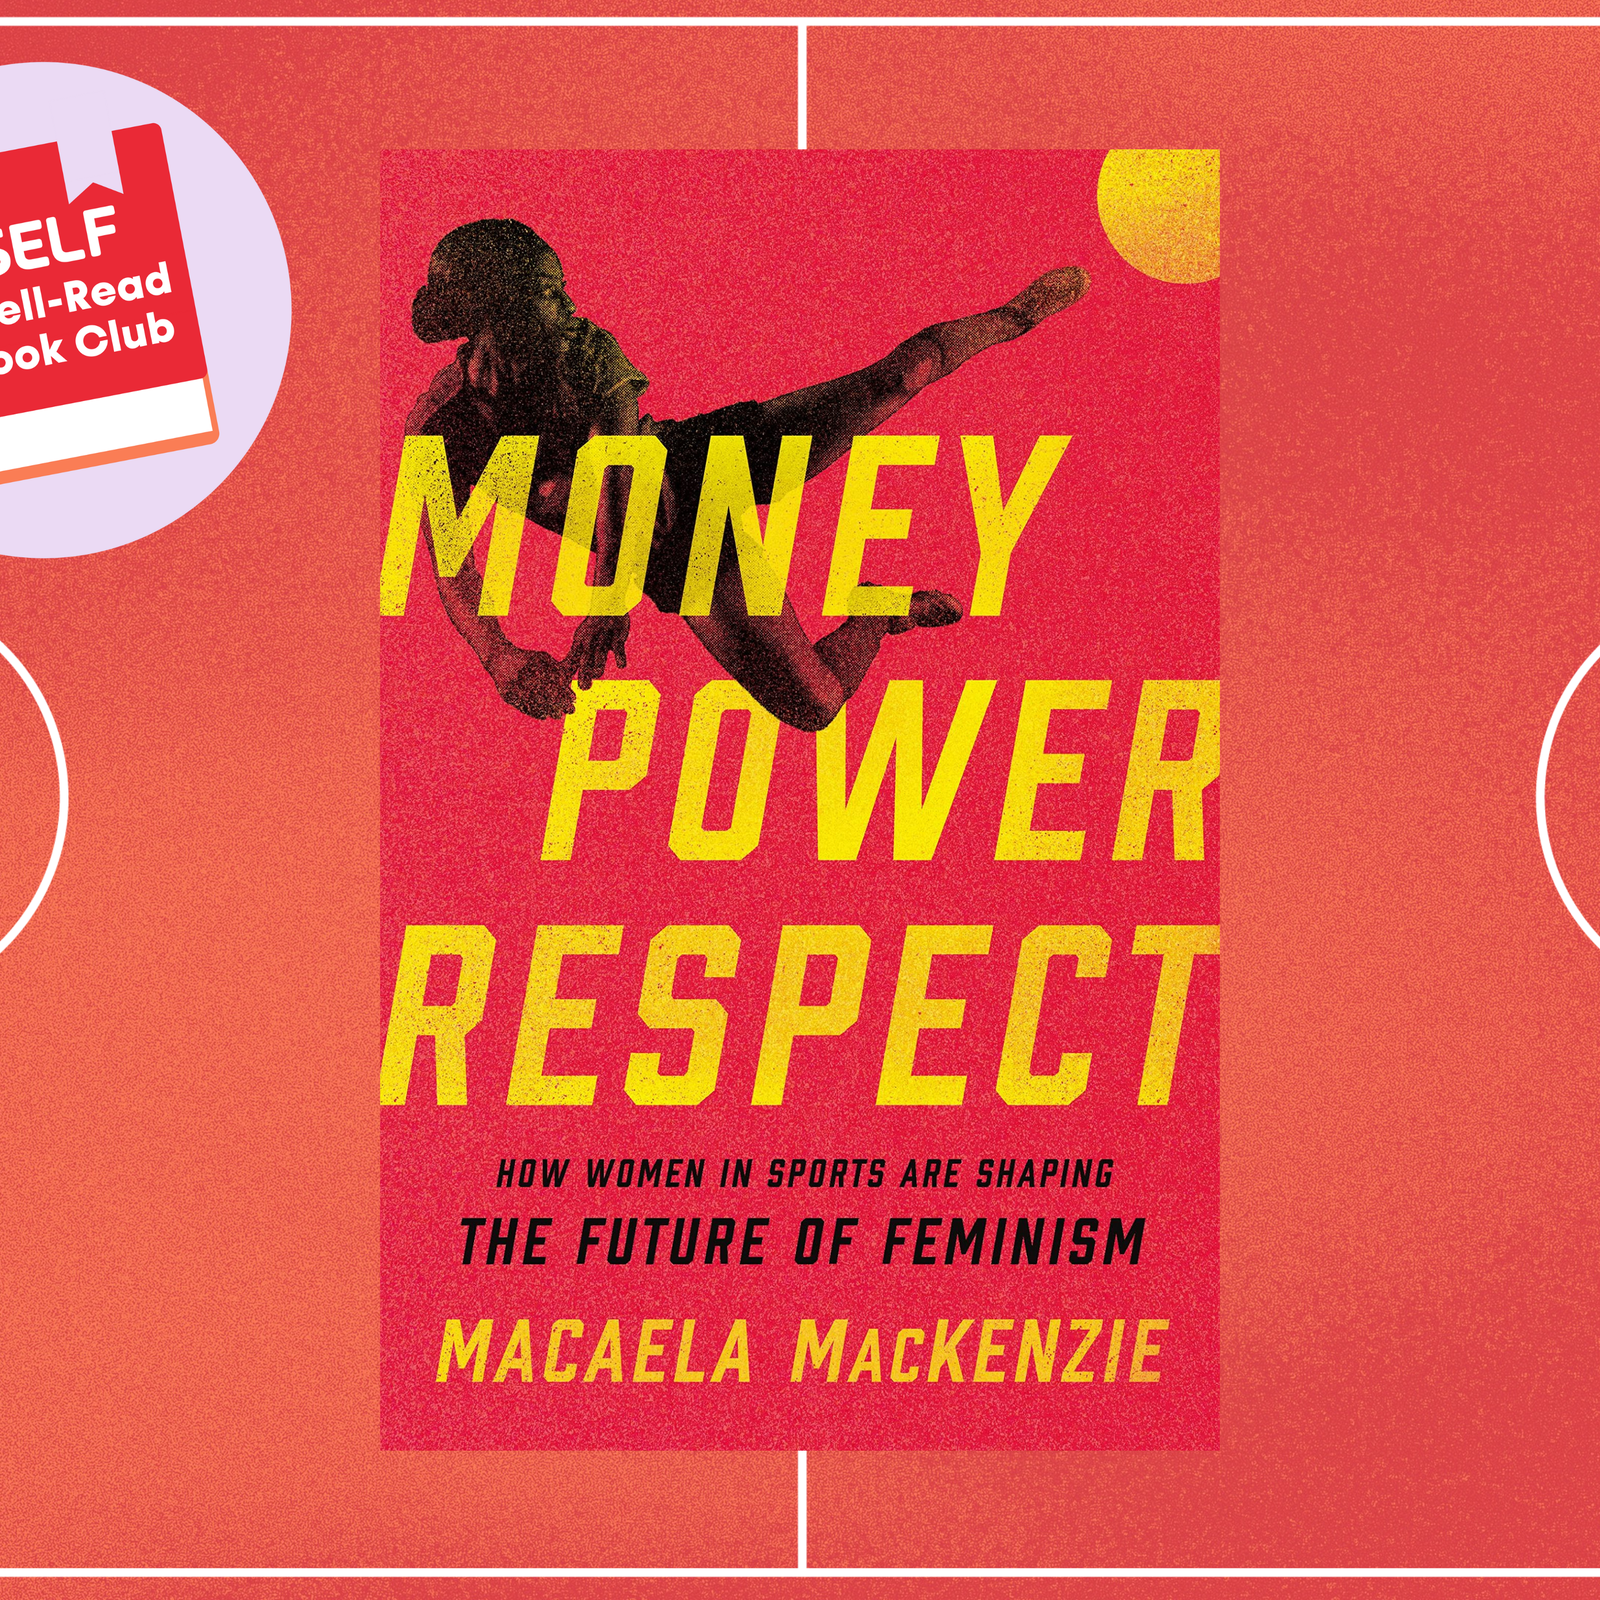 Women in Sports Are Literally Changing the Game. This Book Takes a Look at How&-And Why